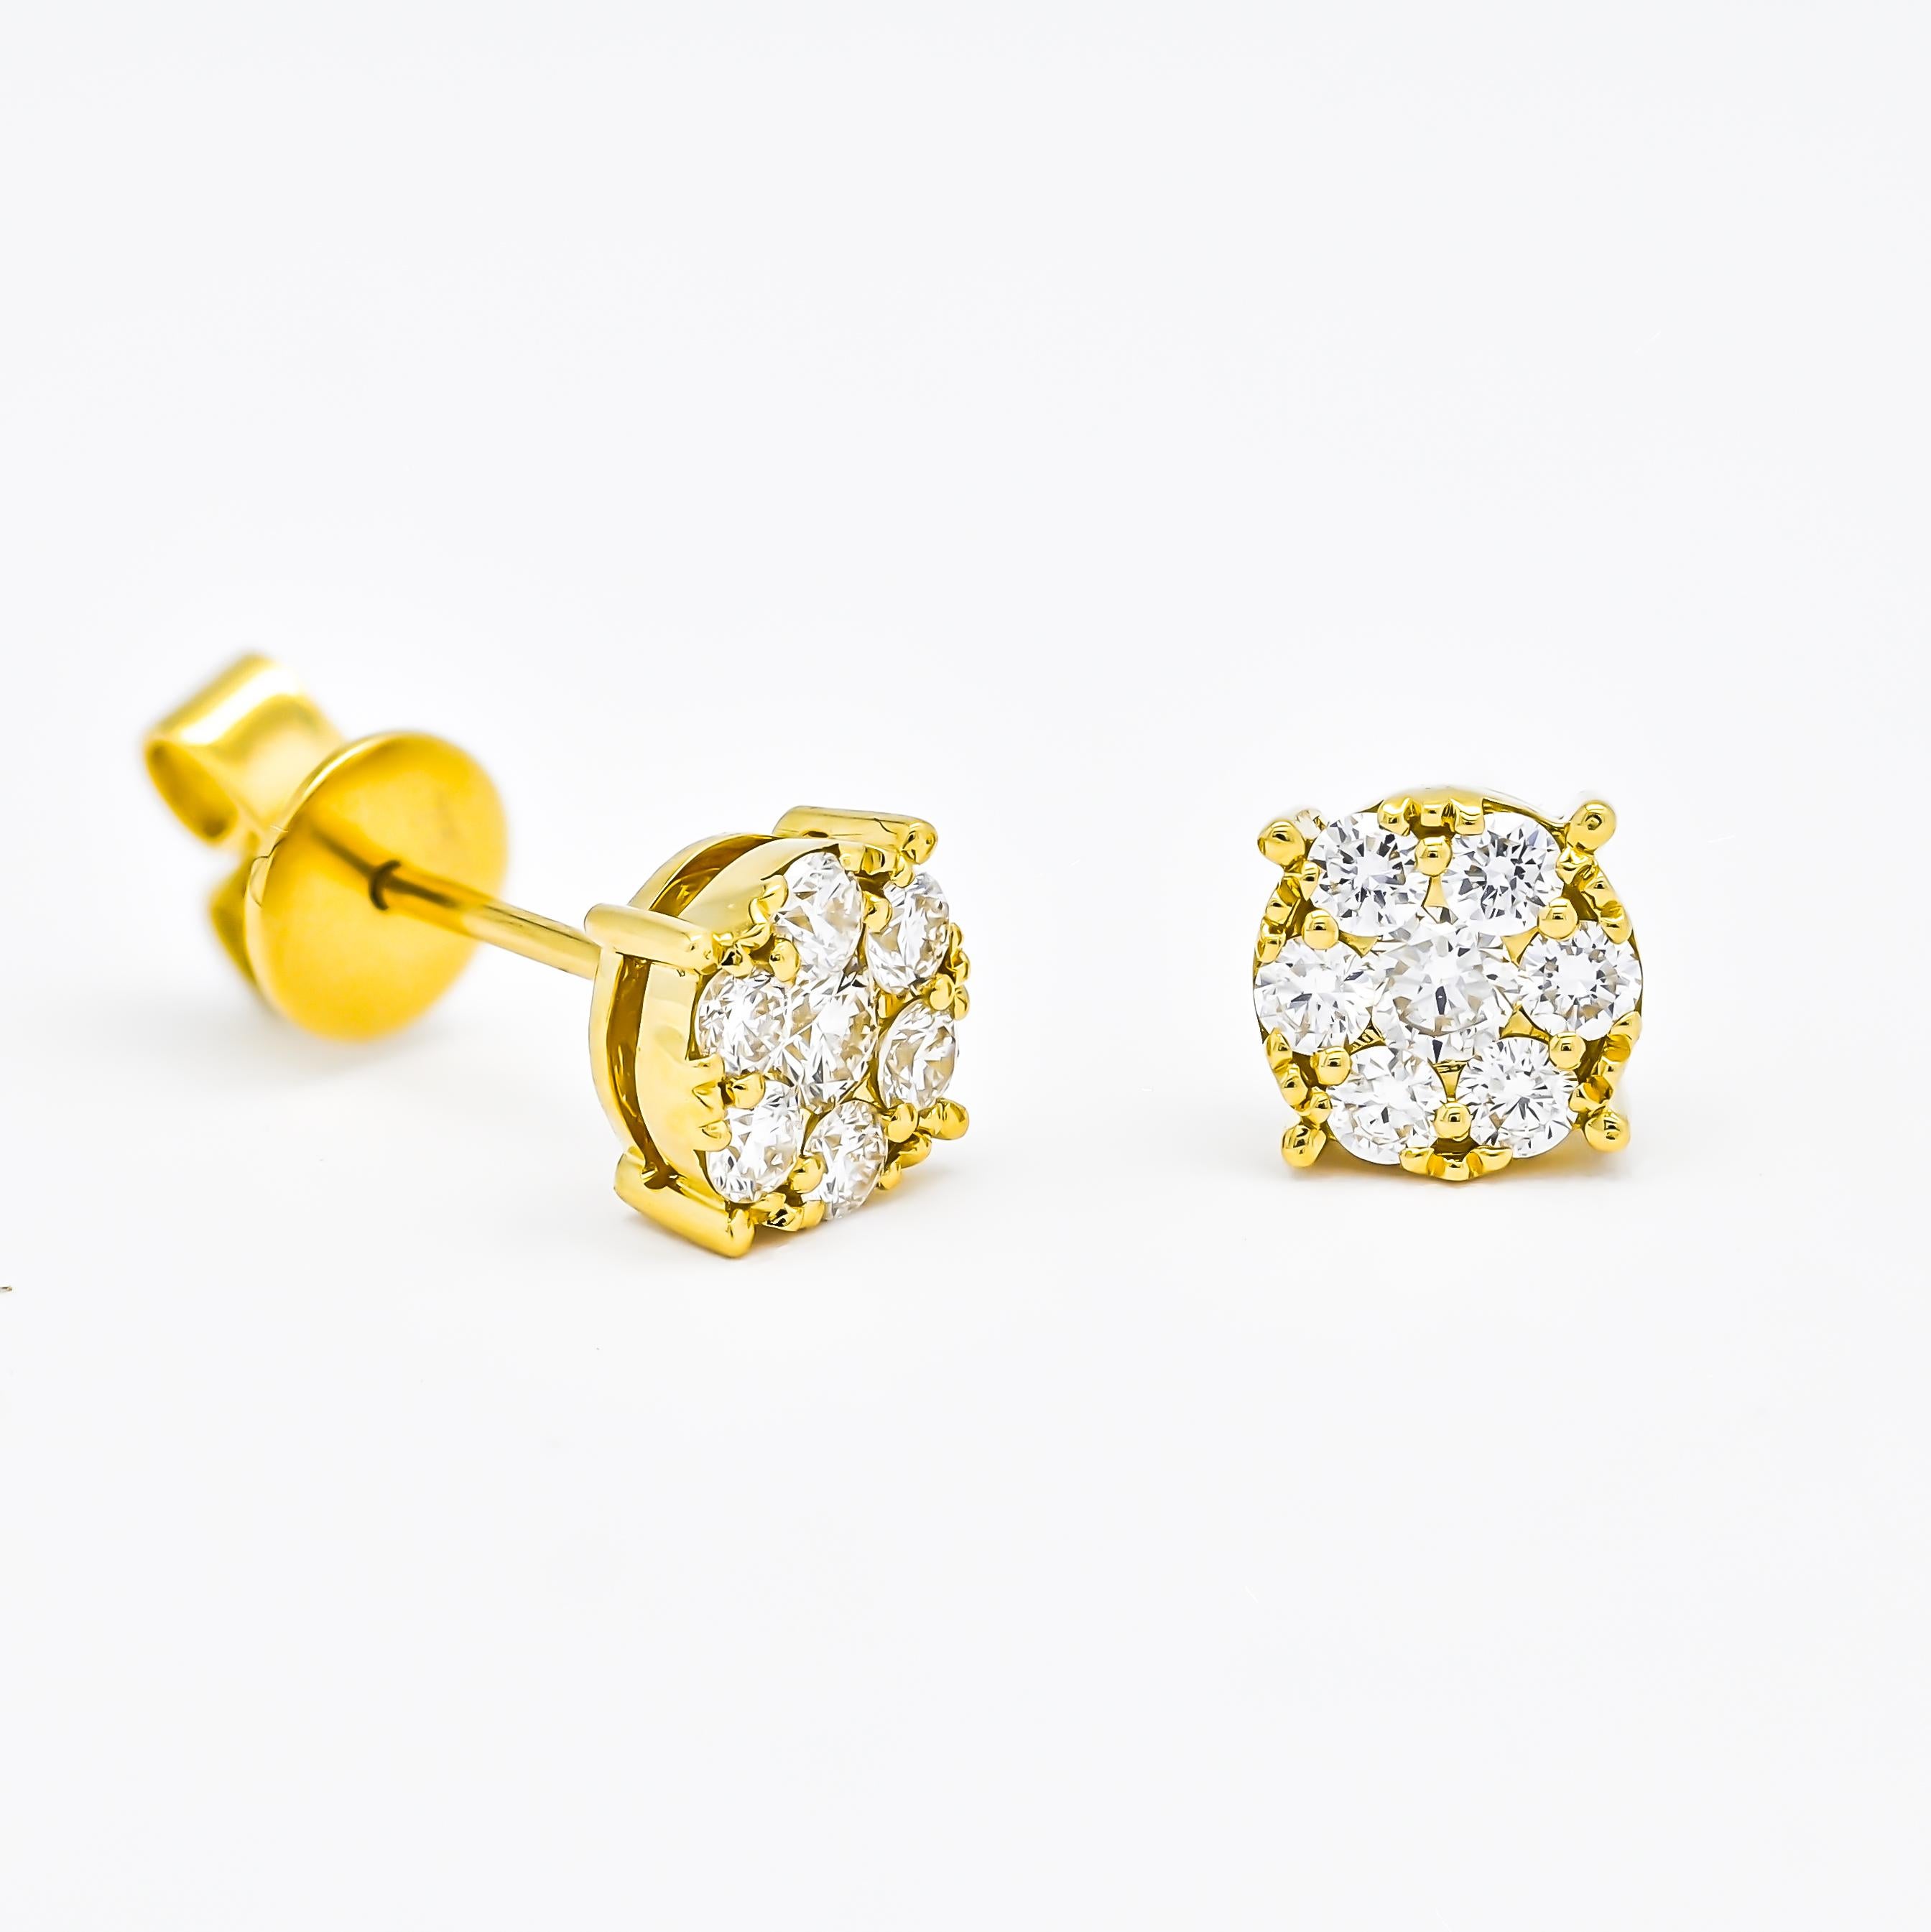 We are thrilled to introduce our exquisite Solitaire Cluster Stud earrings, the epitome of refined elegance and class. These perfectly balanced pieces have been meticulously crafted to make a statement and showcase your impeccable sense of